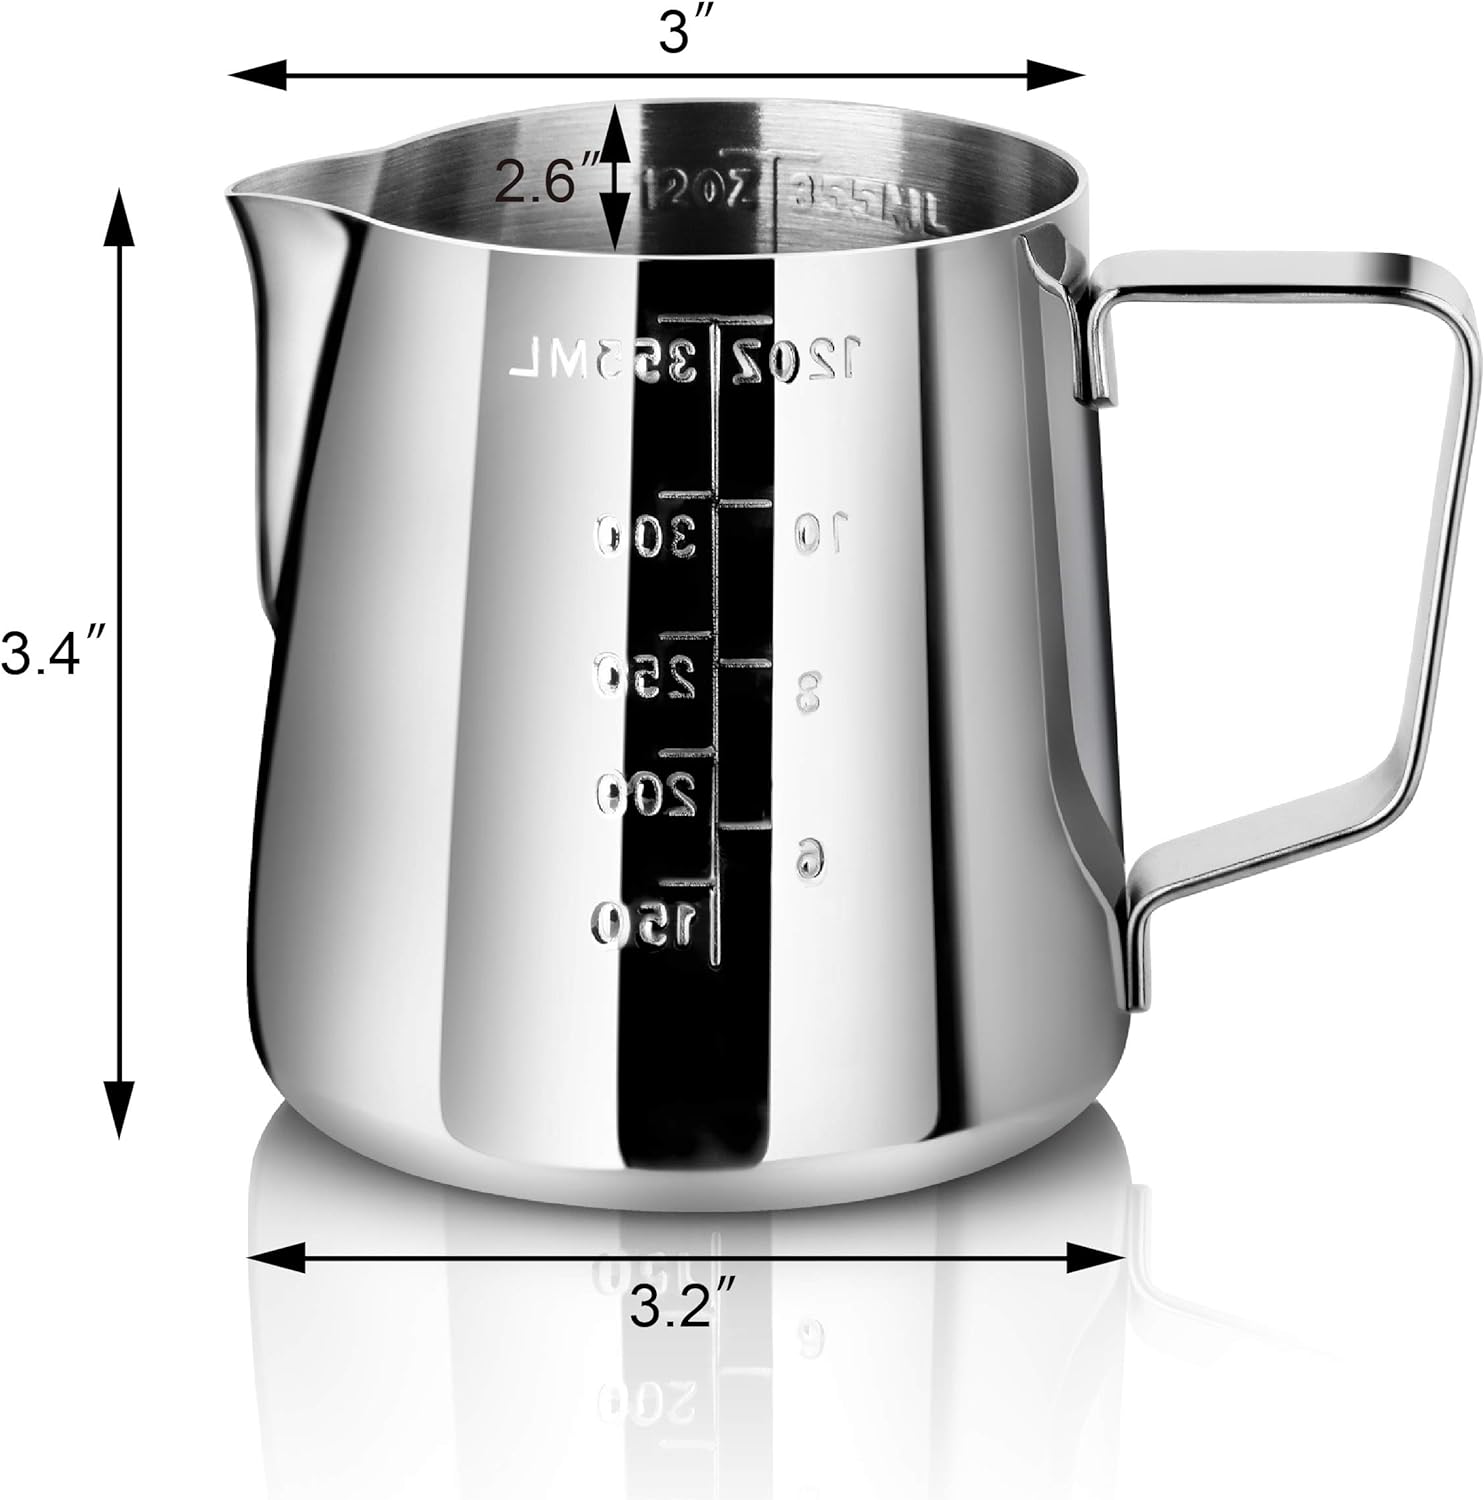 New Star Foodservice 28805 Commercial Grade Stainless Steel 18/8 Frothing Pitcher, 12-Ounce with Measurement Scale